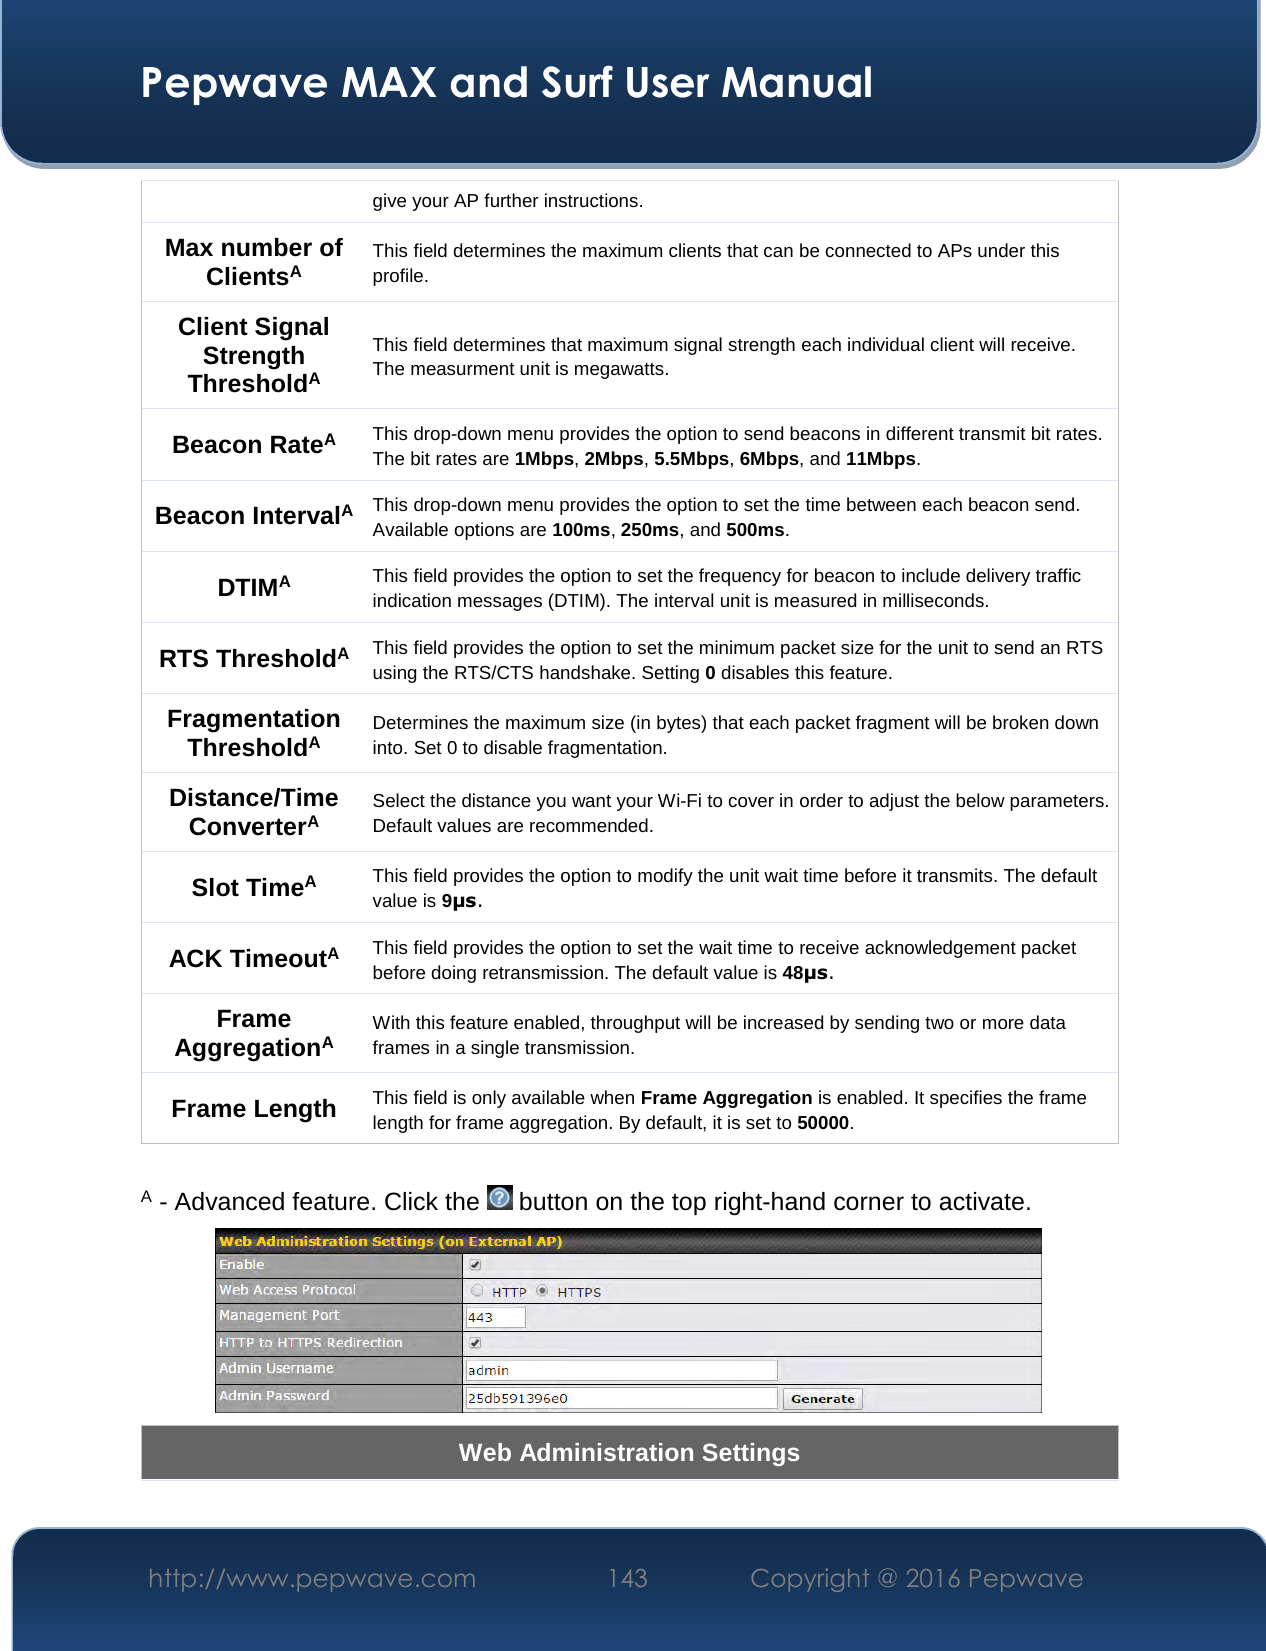  Pepwave MAX and Surf User Manual http://www.pepwave.com  143    Copyright @ 2016 Pepwave   give your AP further instructions. Max number of ClientsA This field determines the maximum clients that can be connected to APs under this profile.  Client Signal Strength ThresholdA This field determines that maximum signal strength each individual client will receive. The measurment unit is megawatts. Beacon RateA This drop-down menu provides the option to send beacons in different transmit bit rates. The bit rates are 1Mbps, 2Mbps, 5.5Mbps, 6Mbps, and 11Mbps. Beacon IntervalA This drop-down menu provides the option to set the time between each beacon send. Available options are 100ms, 250ms, and 500ms. DTIMA This field provides the option to set the frequency for beacon to include delivery traffic indication messages (DTIM). The interval unit is measured in milliseconds. RTS ThresholdA This field provides the option to set the minimum packet size for the unit to send an RTS using the RTS/CTS handshake. Setting 0 disables this feature. Fragmentation ThresholdA Determines the maximum size (in bytes) that each packet fragment will be broken down into. Set 0 to disable fragmentation. Distance/Time ConverterA Select the distance you want your Wi-Fi to cover in order to adjust the below parameters. Default values are recommended. Slot TimeA This field provides the option to modify the unit wait time before it transmits. The default value is 9μs. ACK TimeoutA This field provides the option to set the wait time to receive acknowledgement packet before doing retransmission. The default value is 48μs. Frame AggregationA With this feature enabled, throughput will be increased by sending two or more data frames in a single transmission. Frame Length  This field is only available when Frame Aggregation is enabled. It specifies the frame length for frame aggregation. By default, it is set to 50000.  A - Advanced feature. Click the   button on the top right-hand corner to activate.  Web Administration Settings 